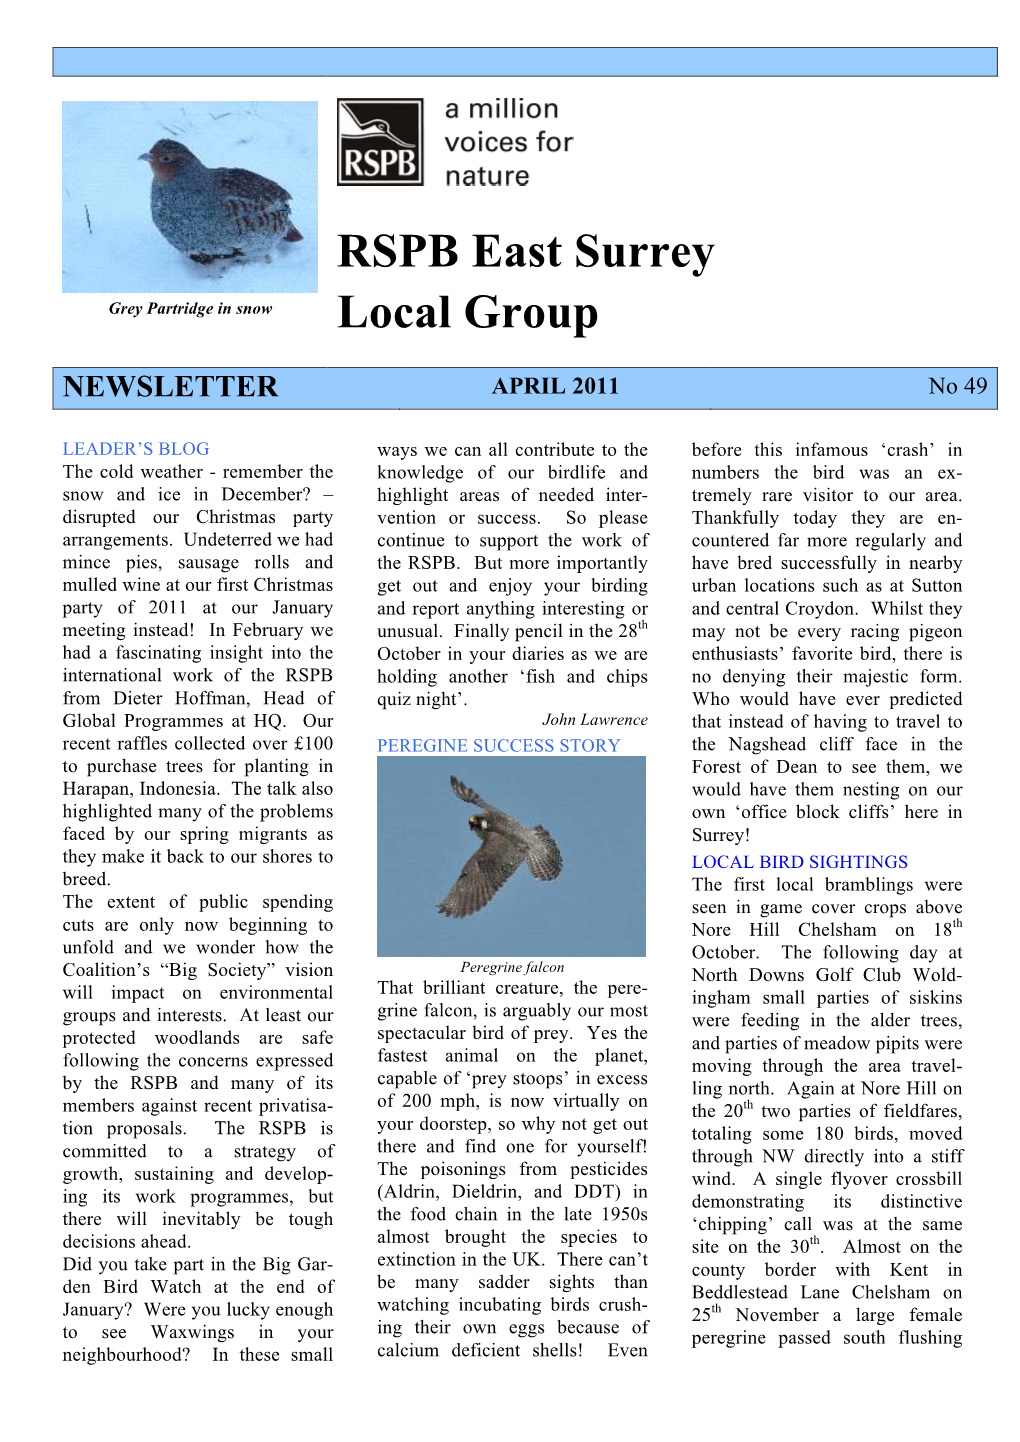 RSPB East Surrey Local Group